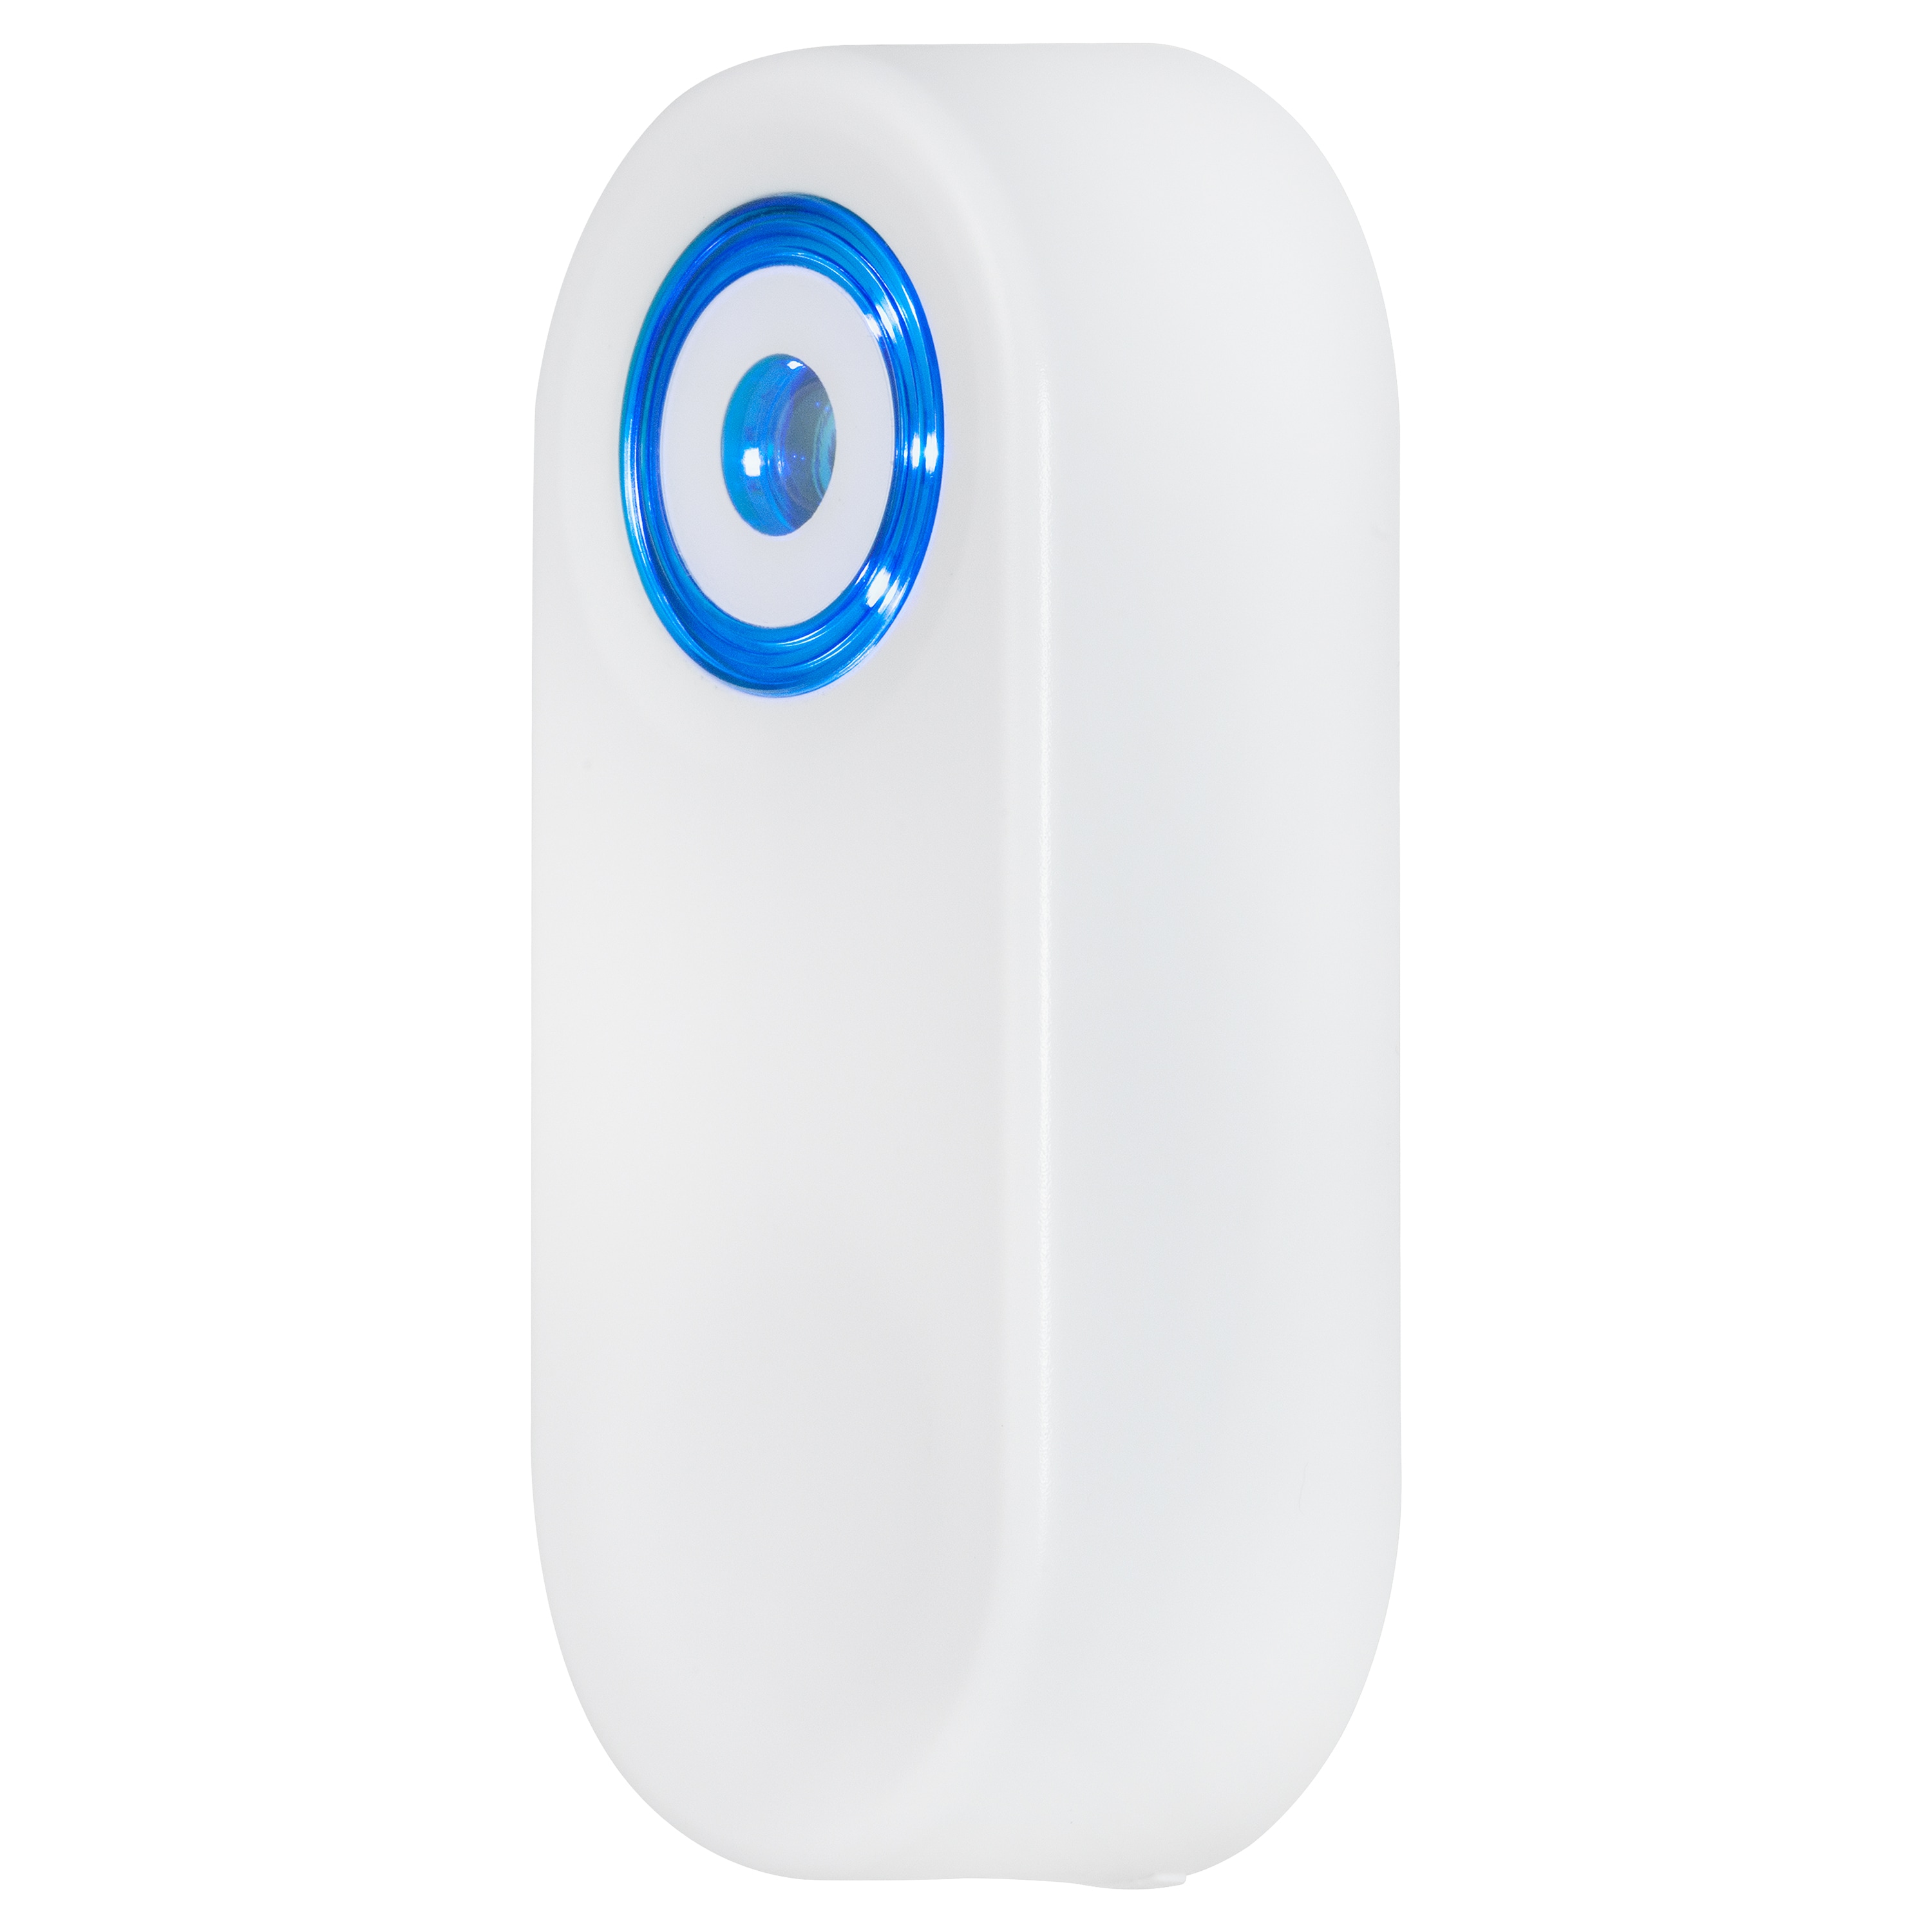 Pyle Home Pyle HD 720p UP Cam/Mini Camera, Wireless Remote Surveillance  Monitoring, Built-in Speaker and Microphone for 2-Way Communication,  Downloadable App (White) in the Simulated Security Cameras department at